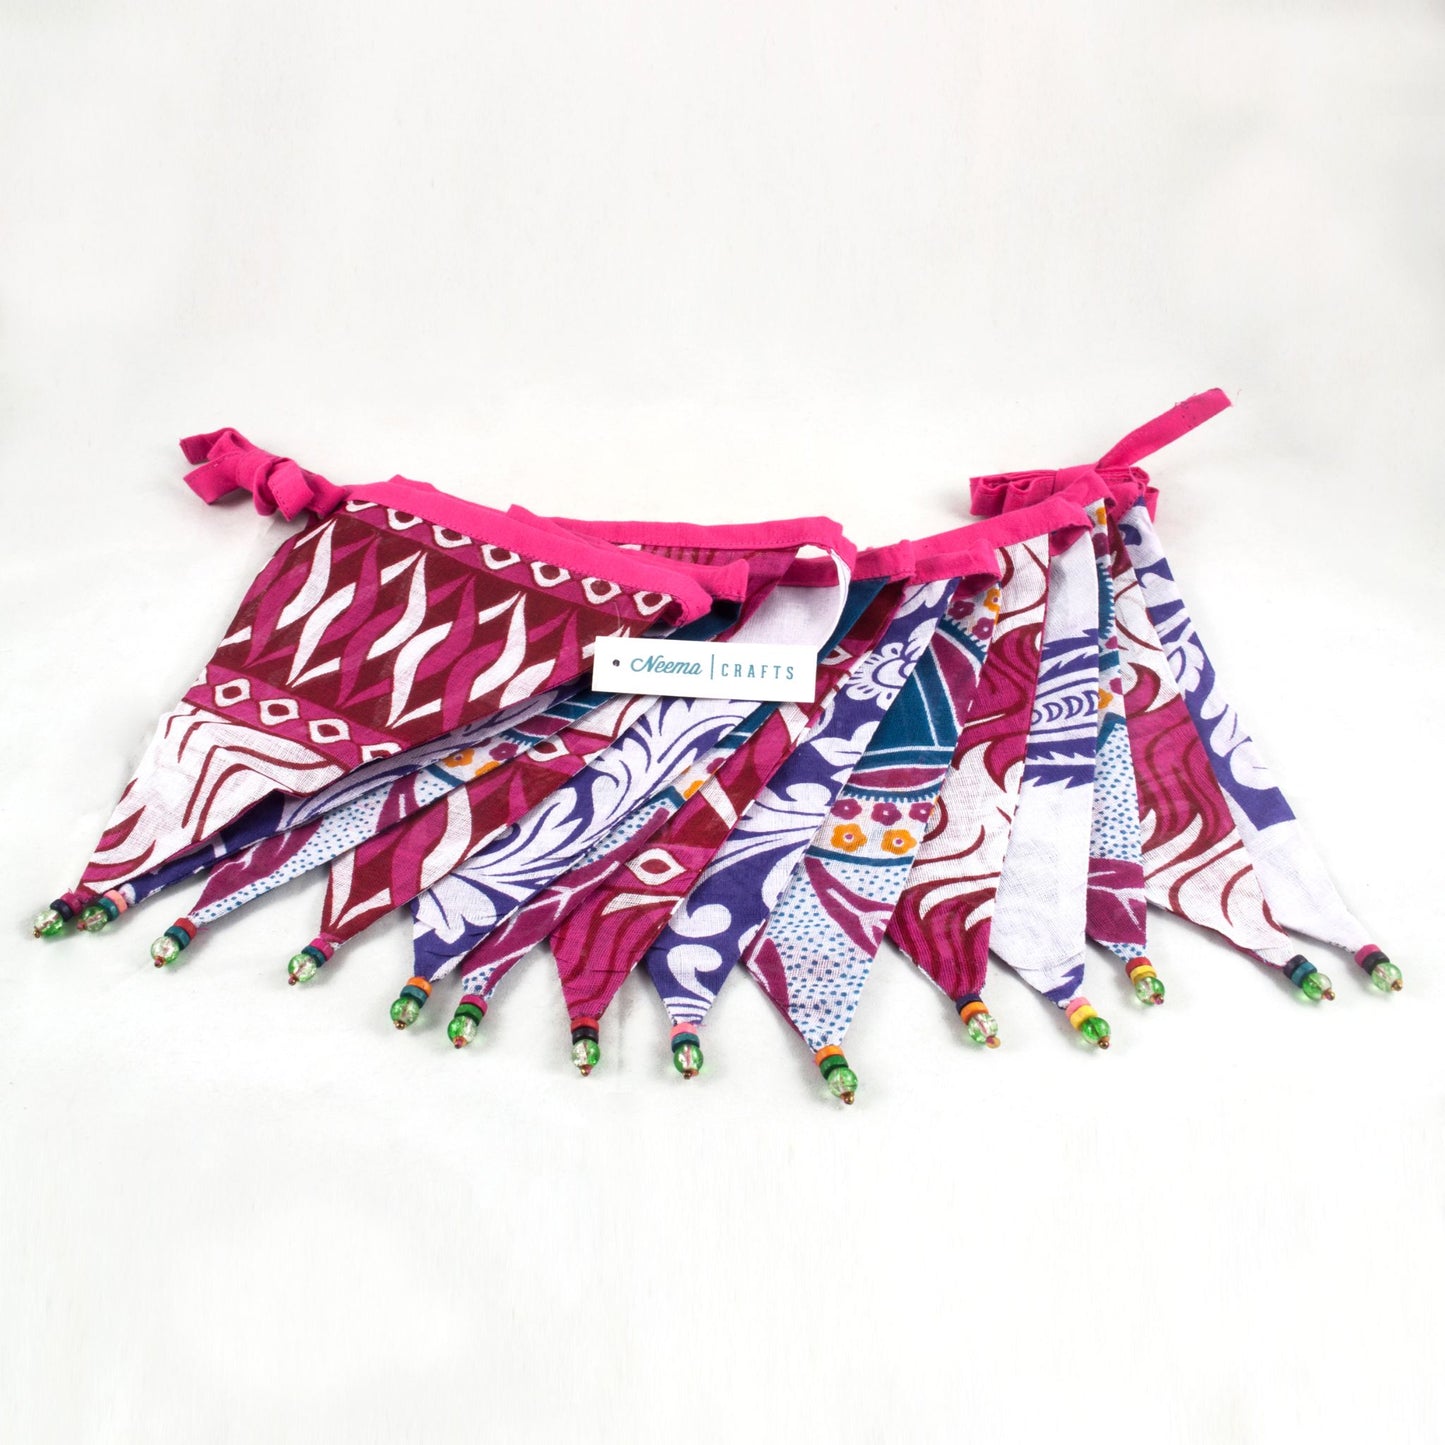 Handmade Bunting with Beads - pink bunting from Neema Crafts